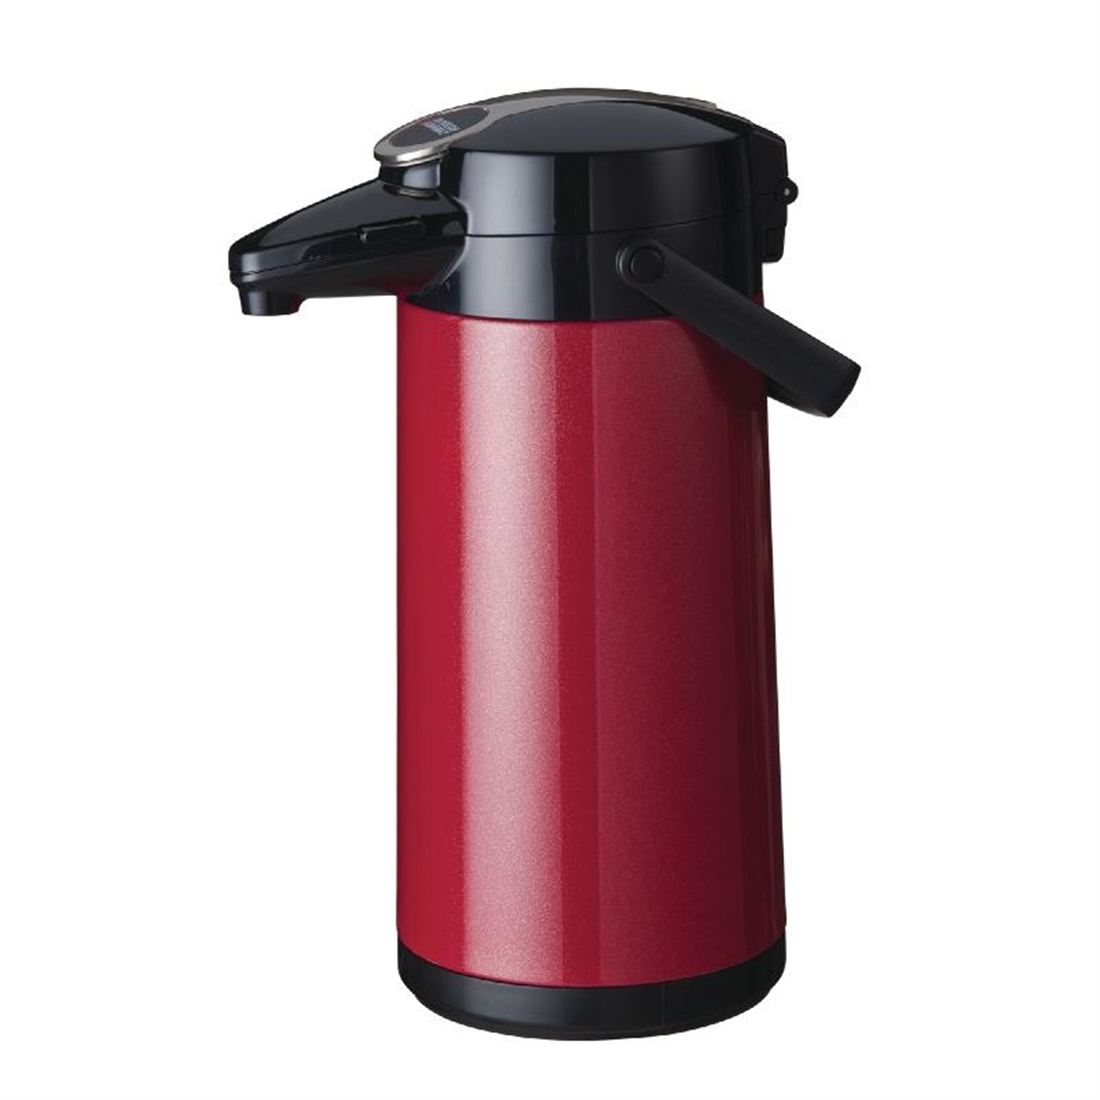 Bravilor Furento 2.2Ltr Airpot with Pump Action Metalic Red